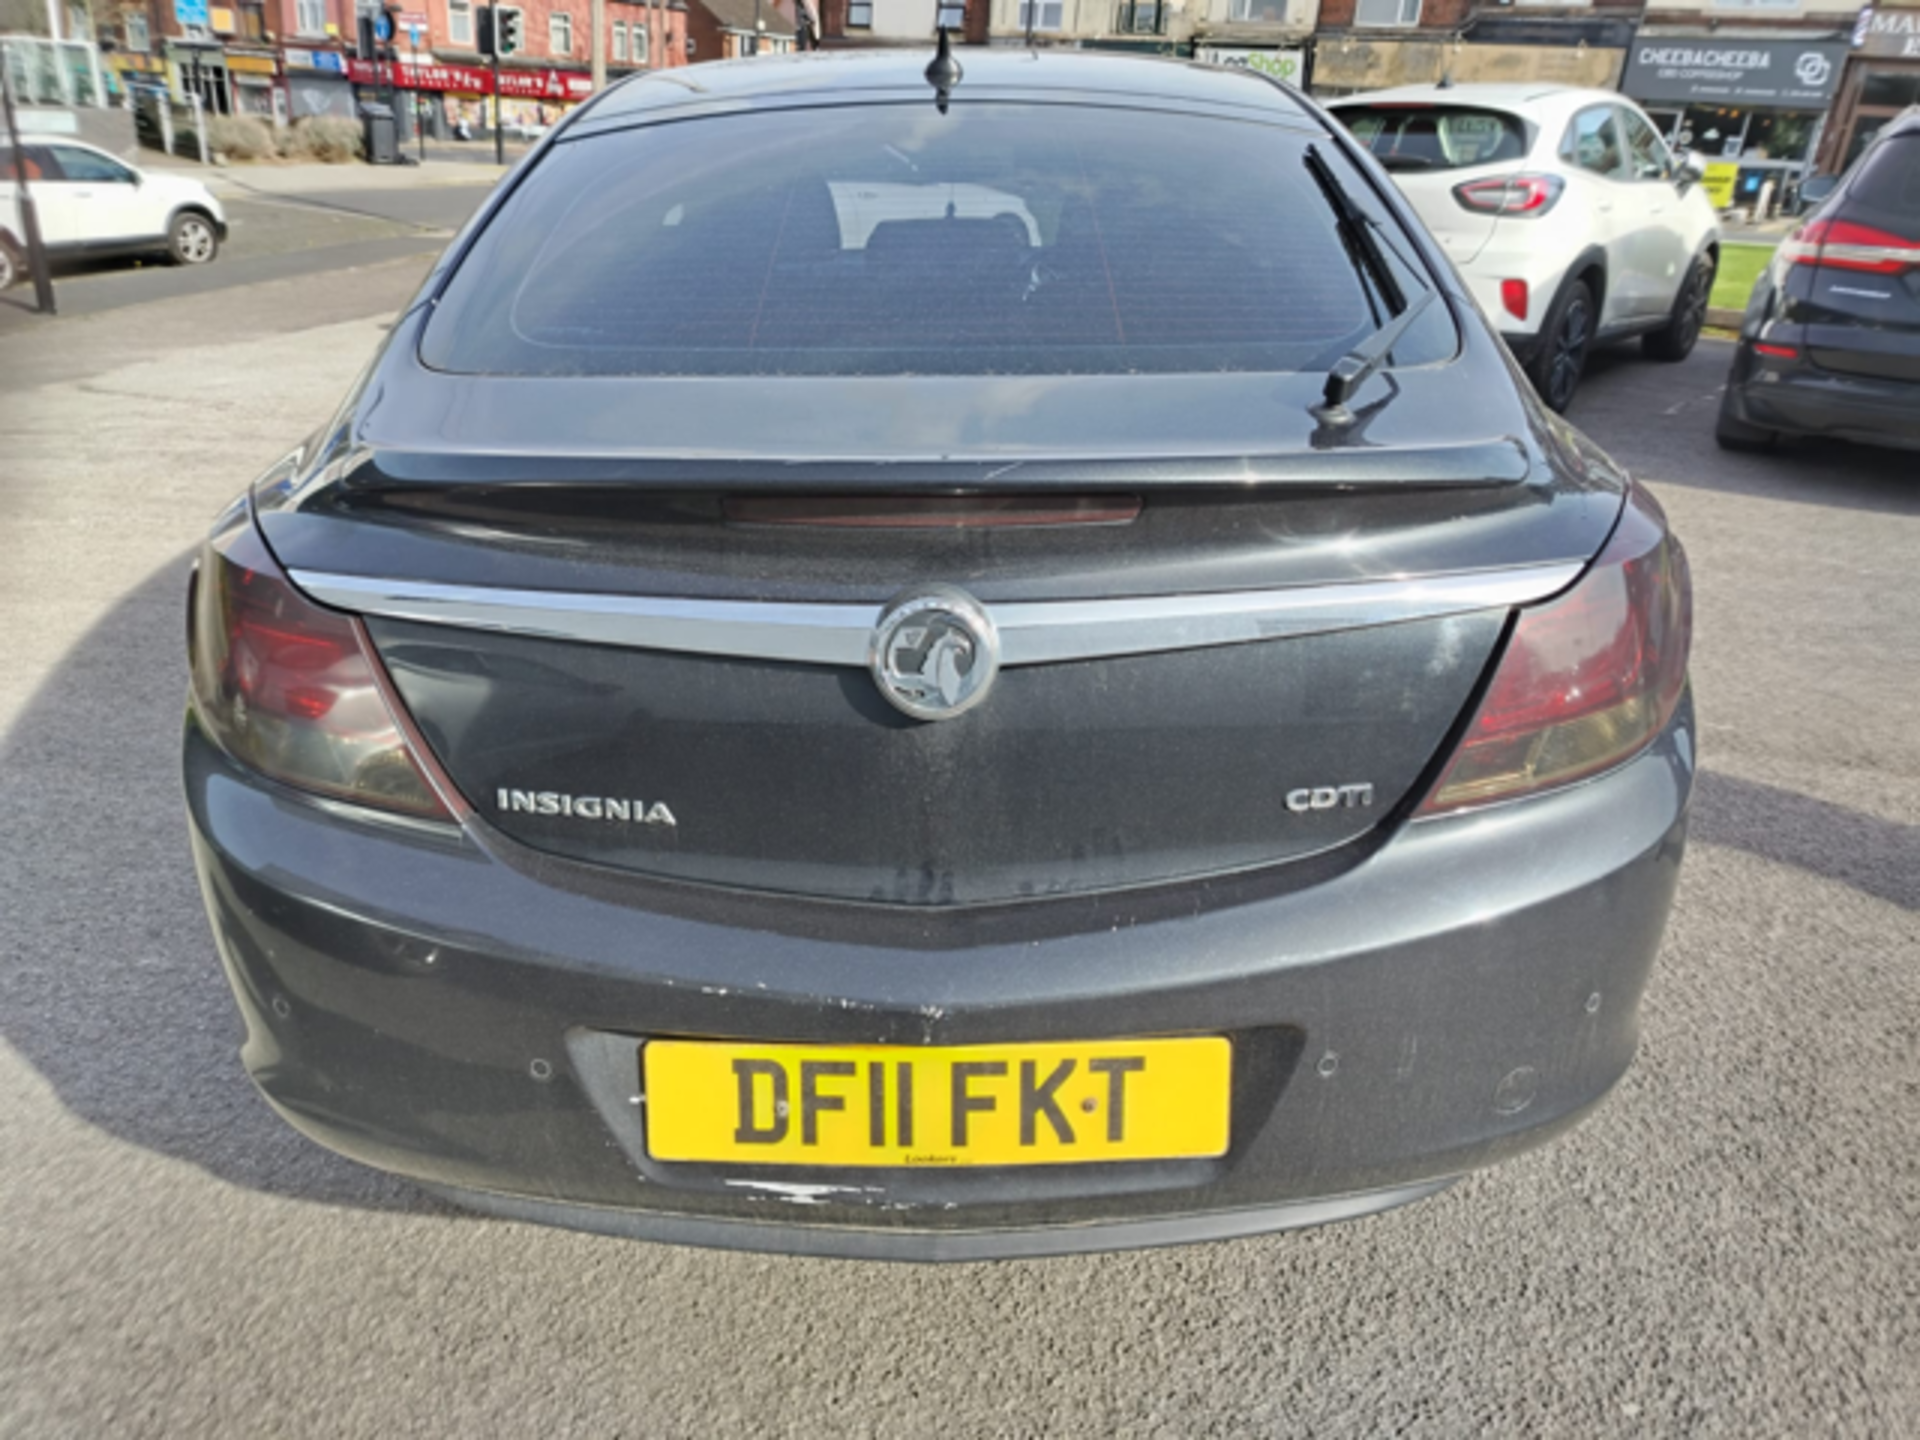 VAUXHALL INSIGNIA DF11 FKT - Image 3 of 11